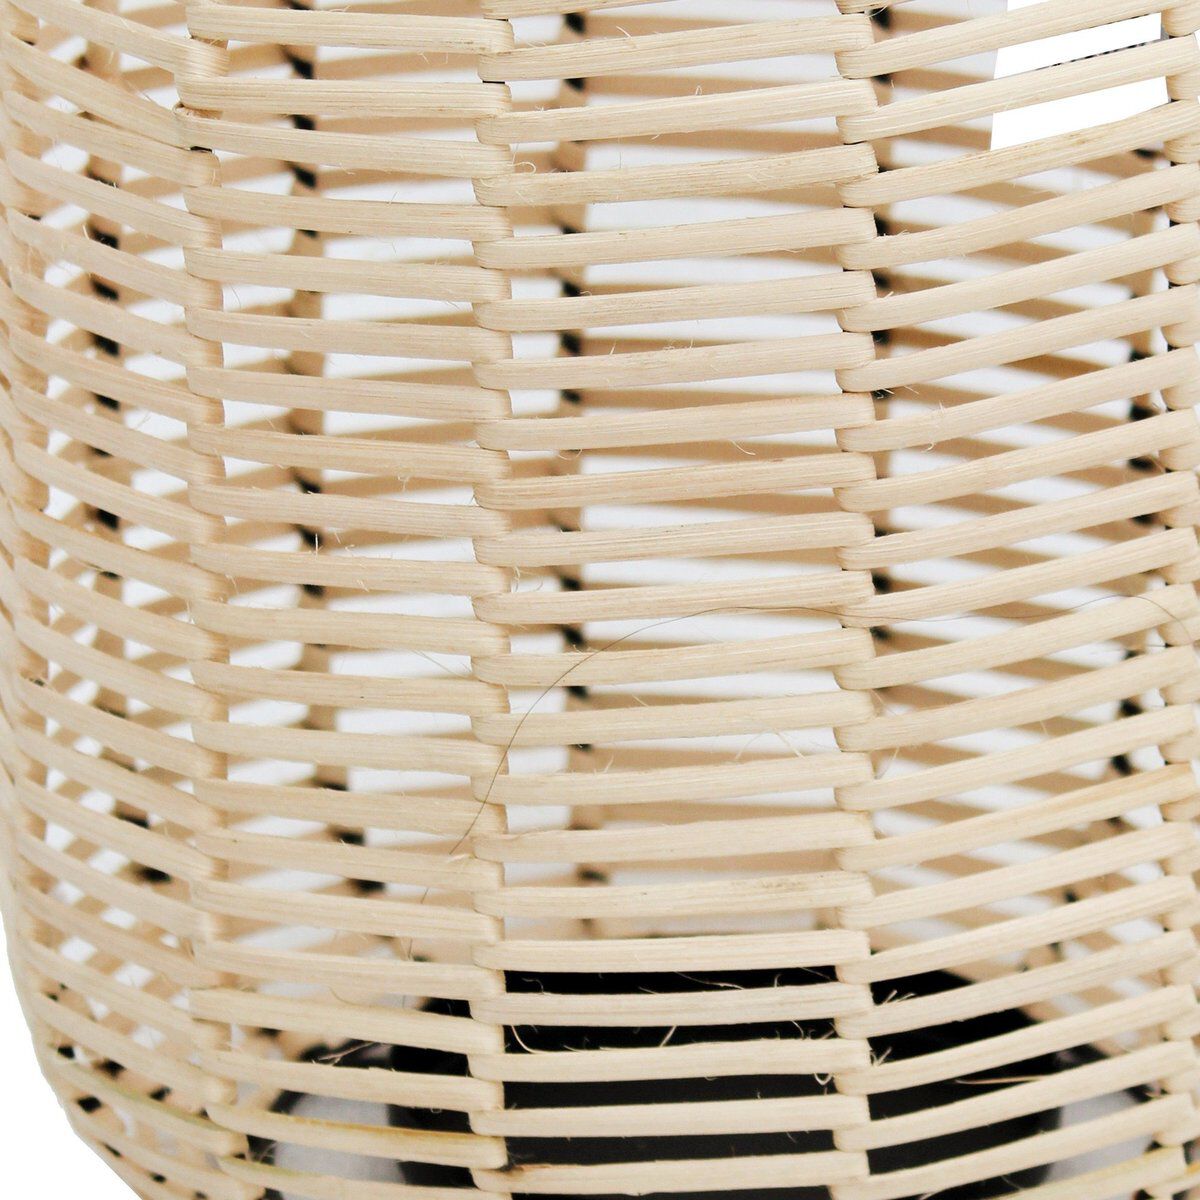 Woven Wicker Lantern with Round Metal Frame and Handle, Beige and Black